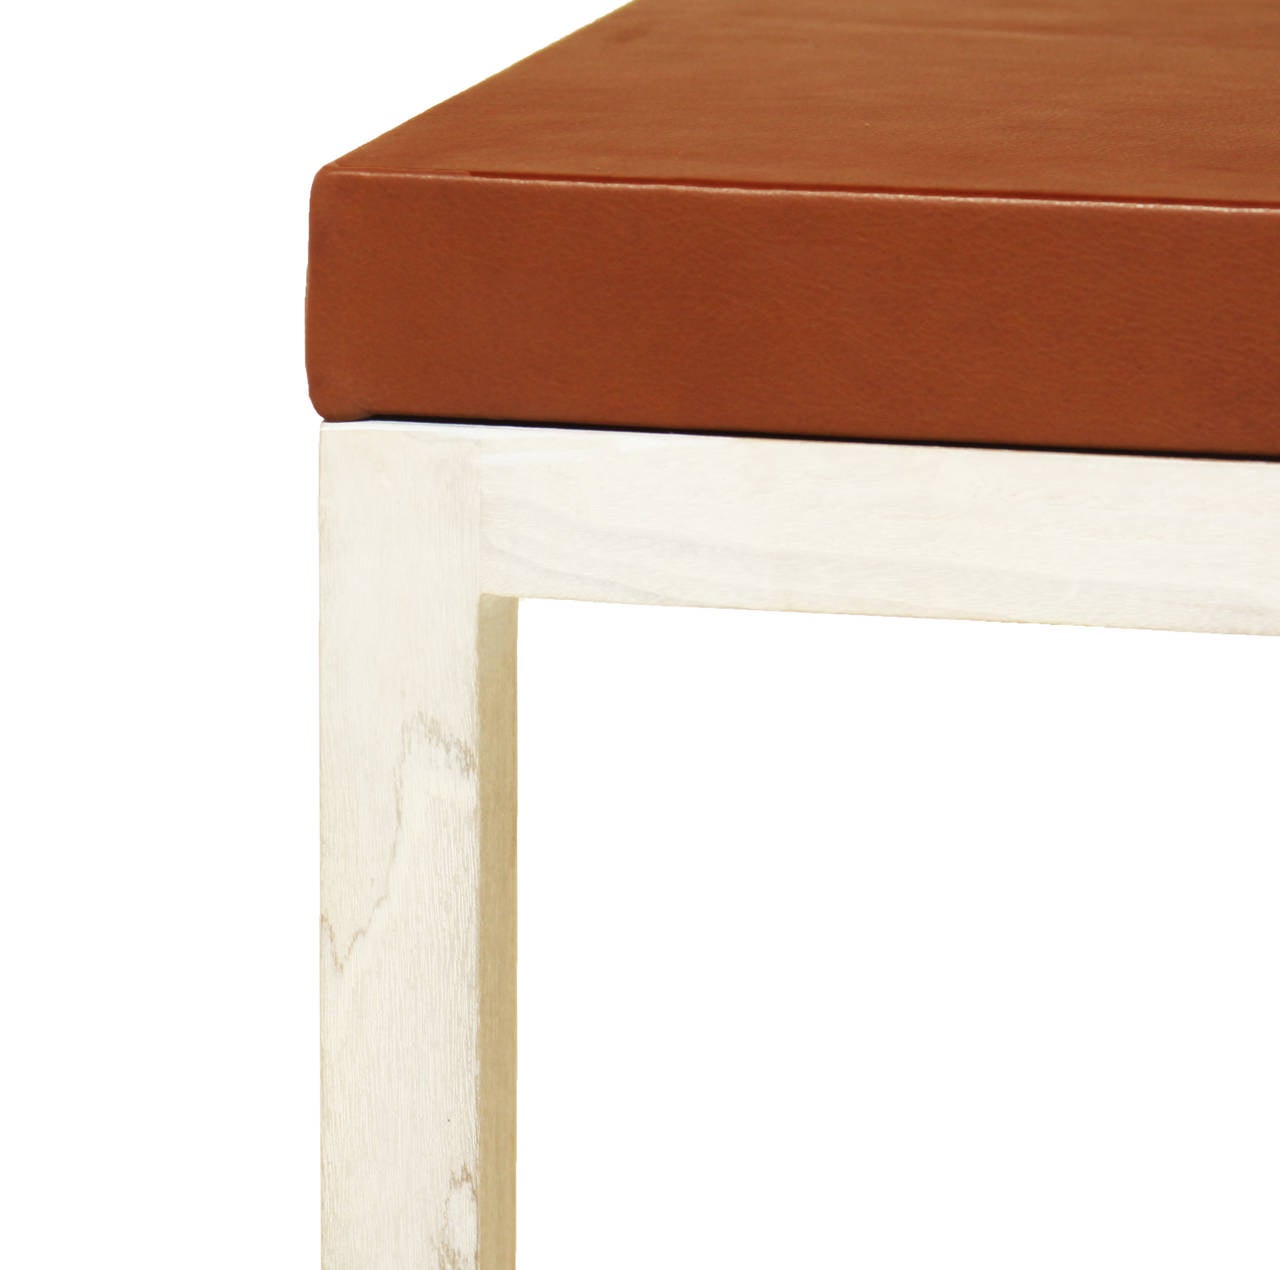 Contemporary The Basic Coffee Table in Bleached Walnut and Leather Top by Thomas Hayes Studio